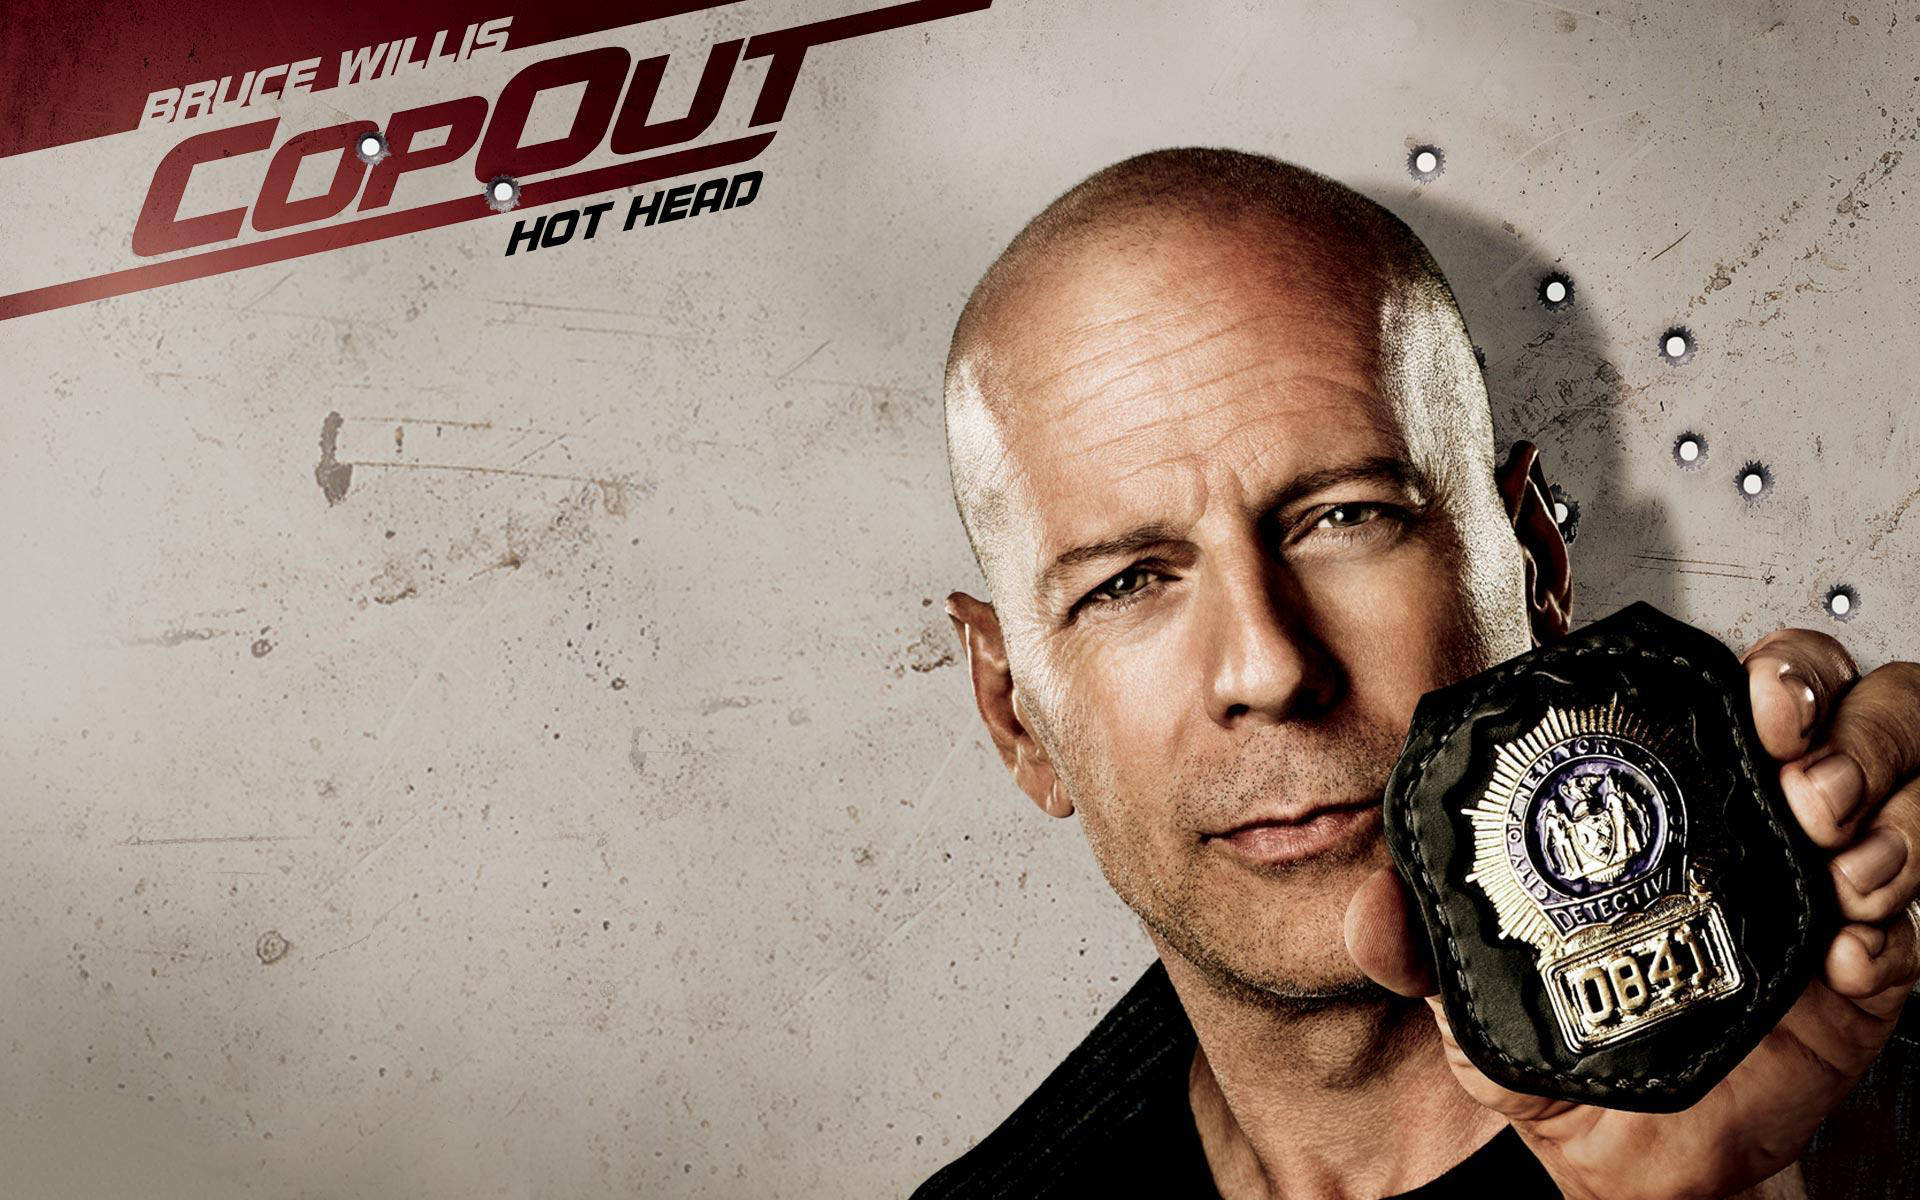 Bruce Willis Cop Out Poster